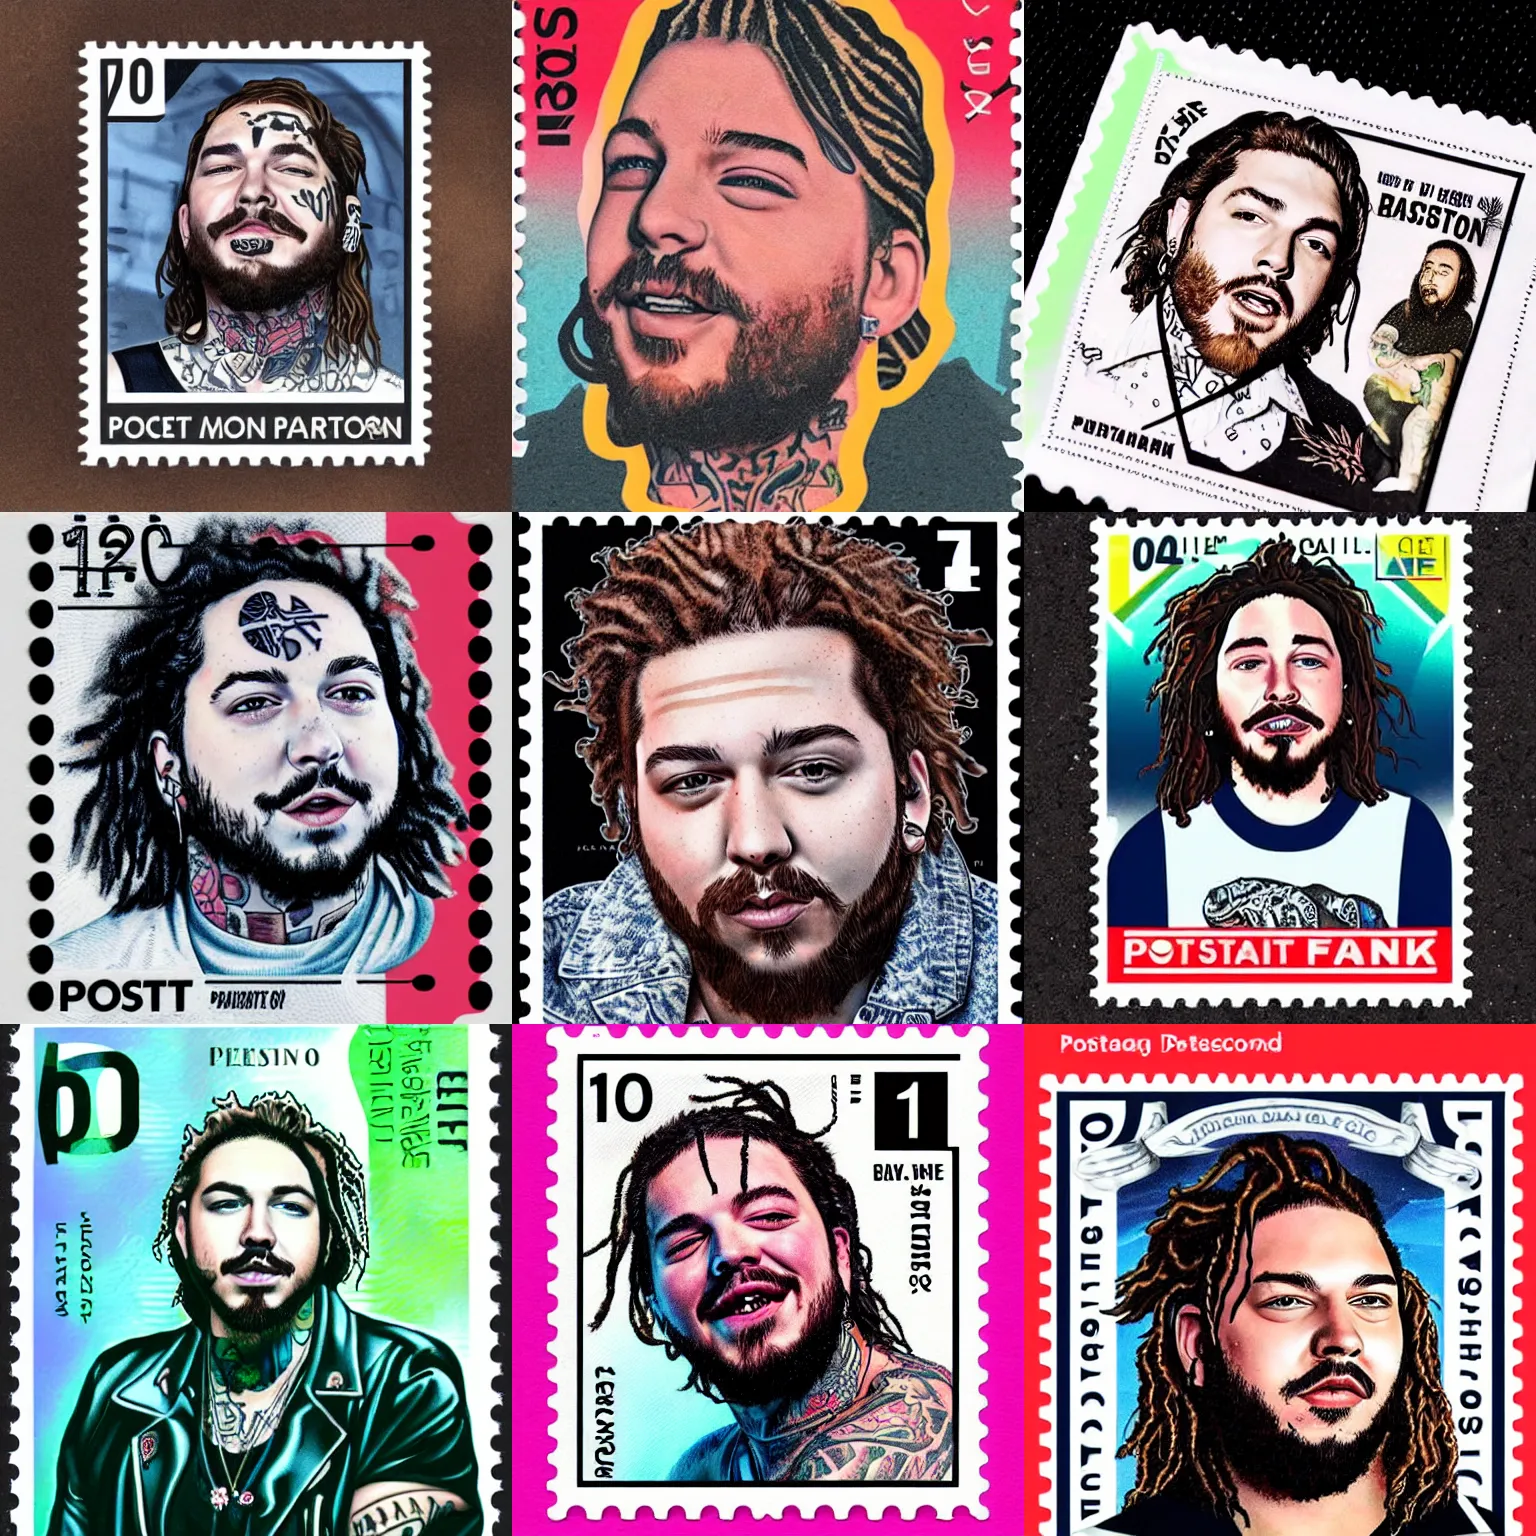 Prompt: portrait of post malone on a postage stamp. tattoos